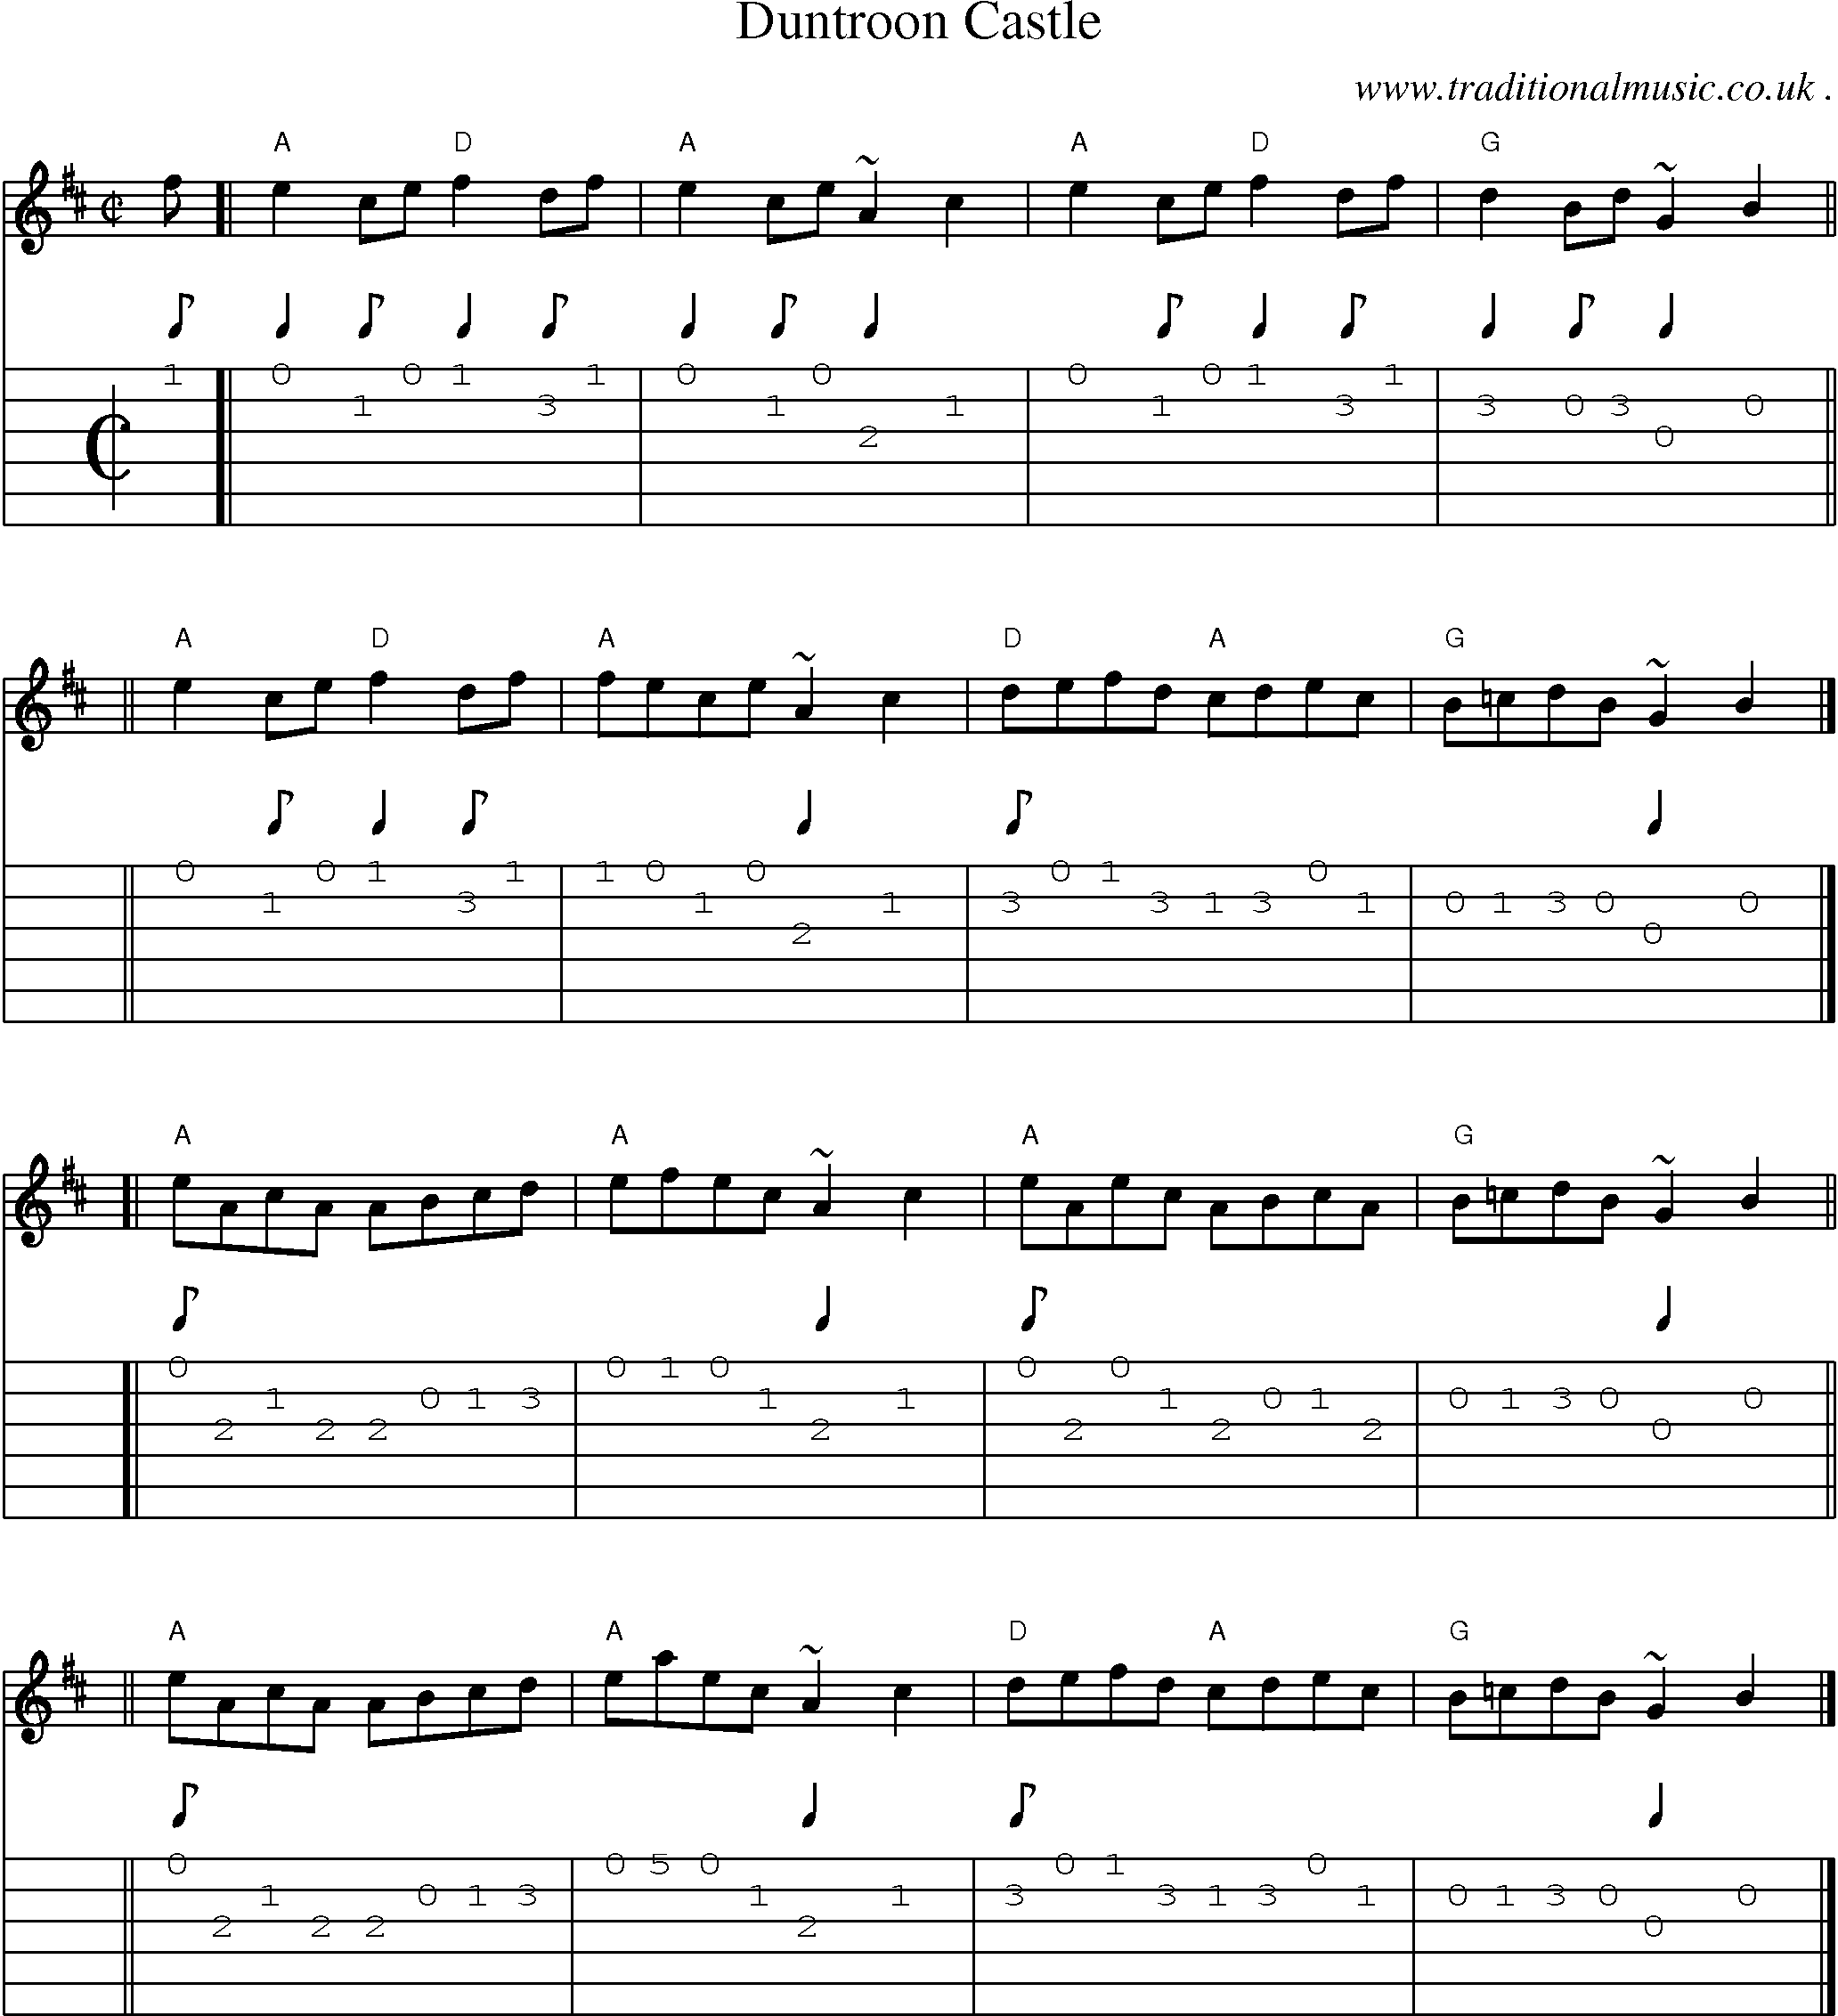 Sheet-music  score, Chords and Guitar Tabs for Duntroon Castle